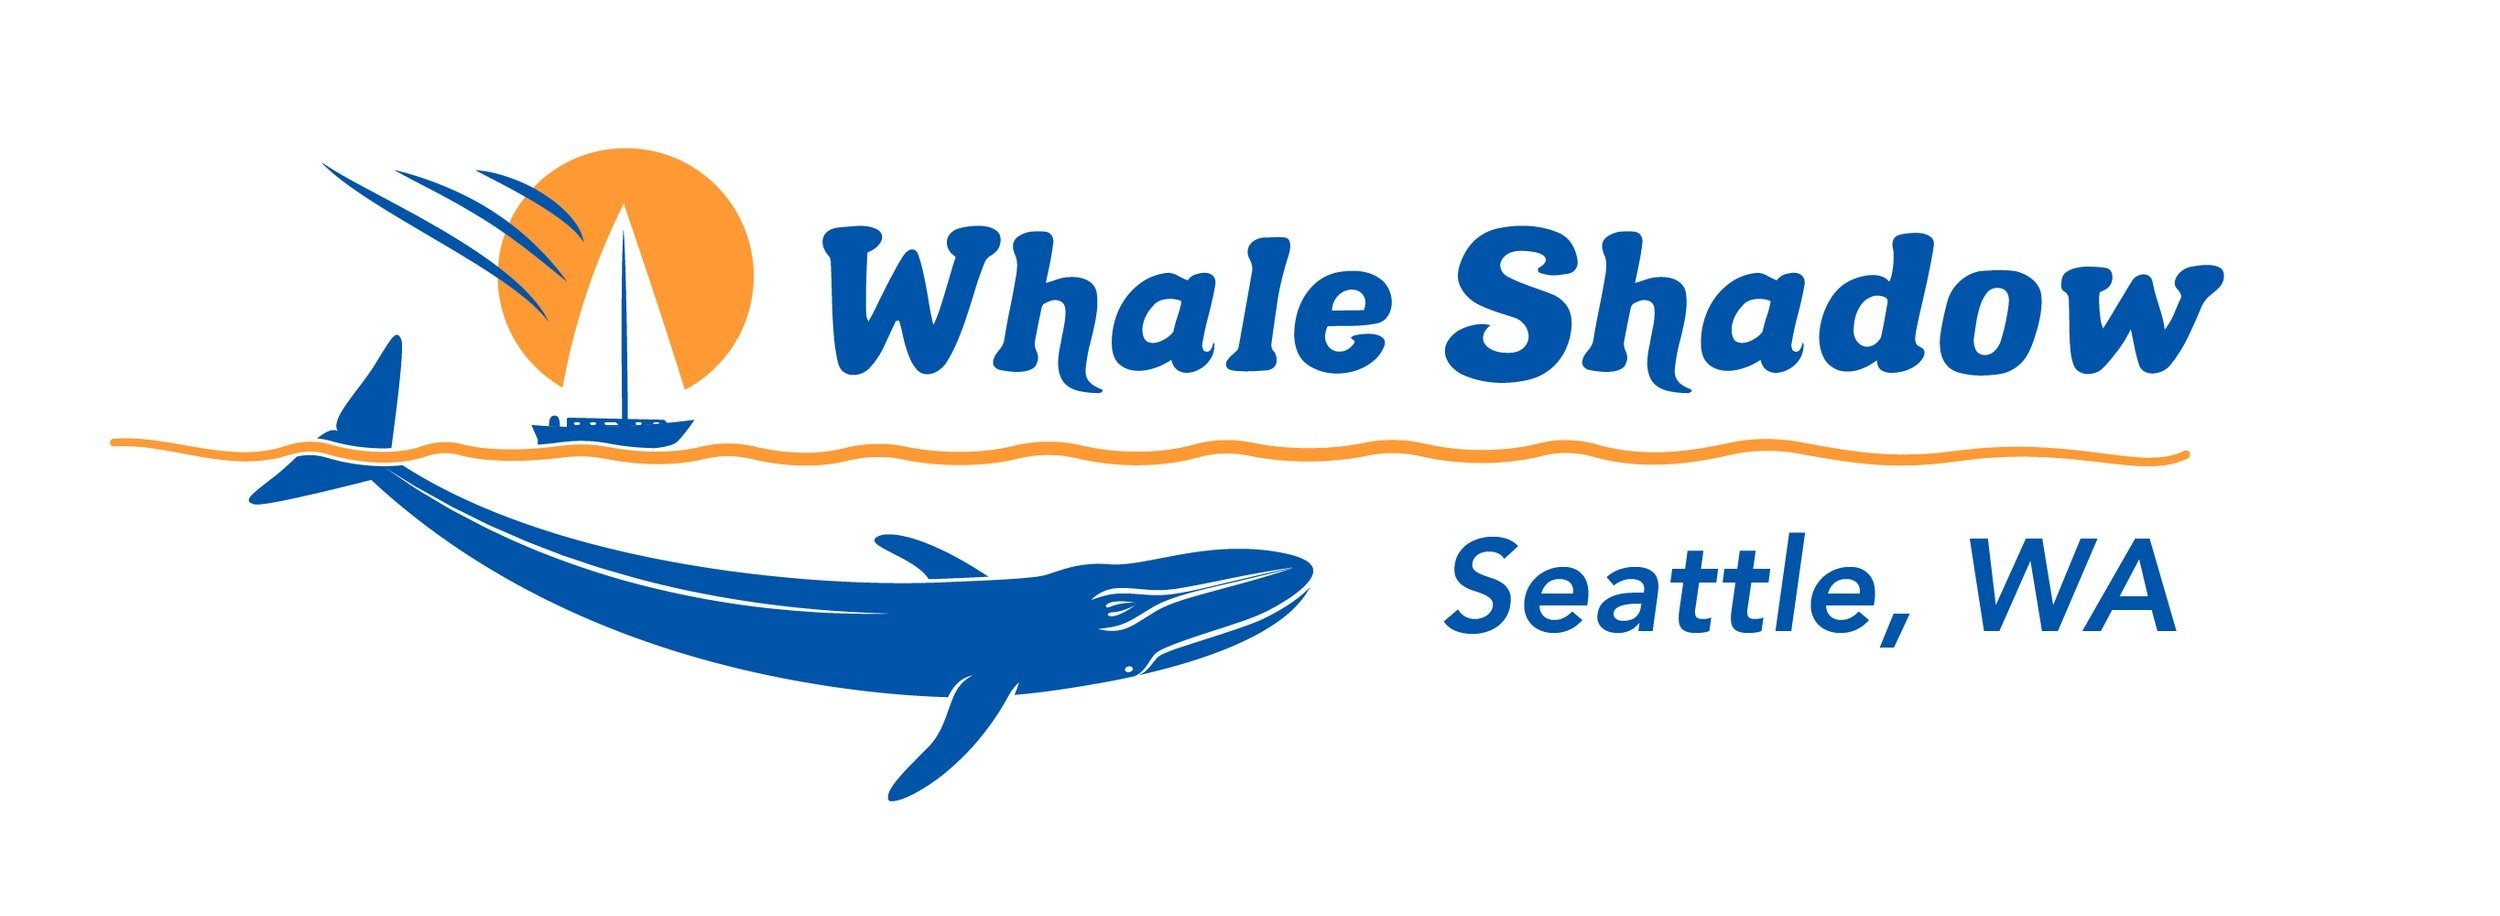  Design for Kristin Pederson, captain of the sailboat Whale Shadow. This logo and name were installed on the side of the vessel. 